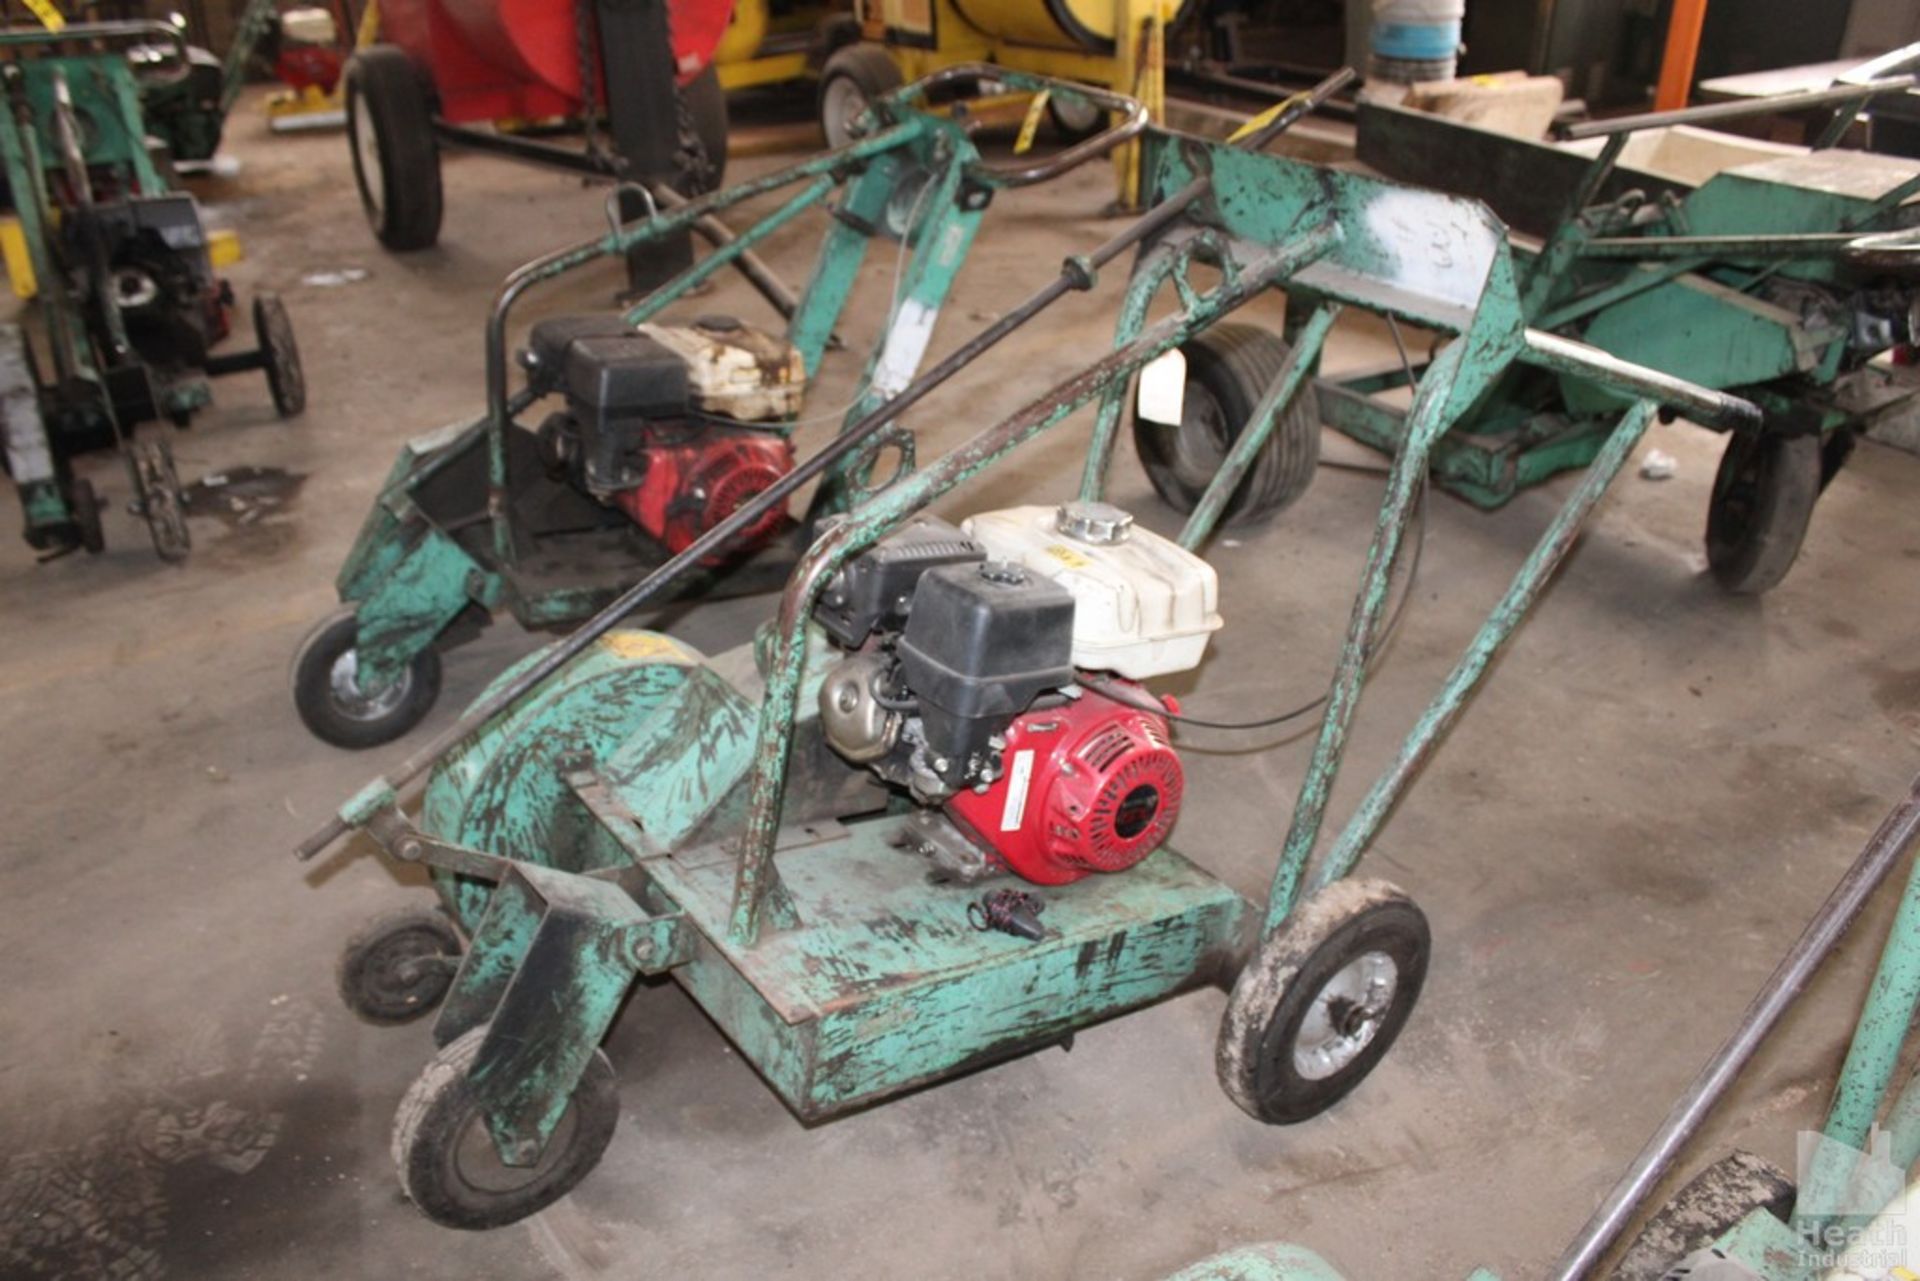 GARLOCK ROOFING SAW WITH HONDA GX270 GAS ENGINE - Image 2 of 4